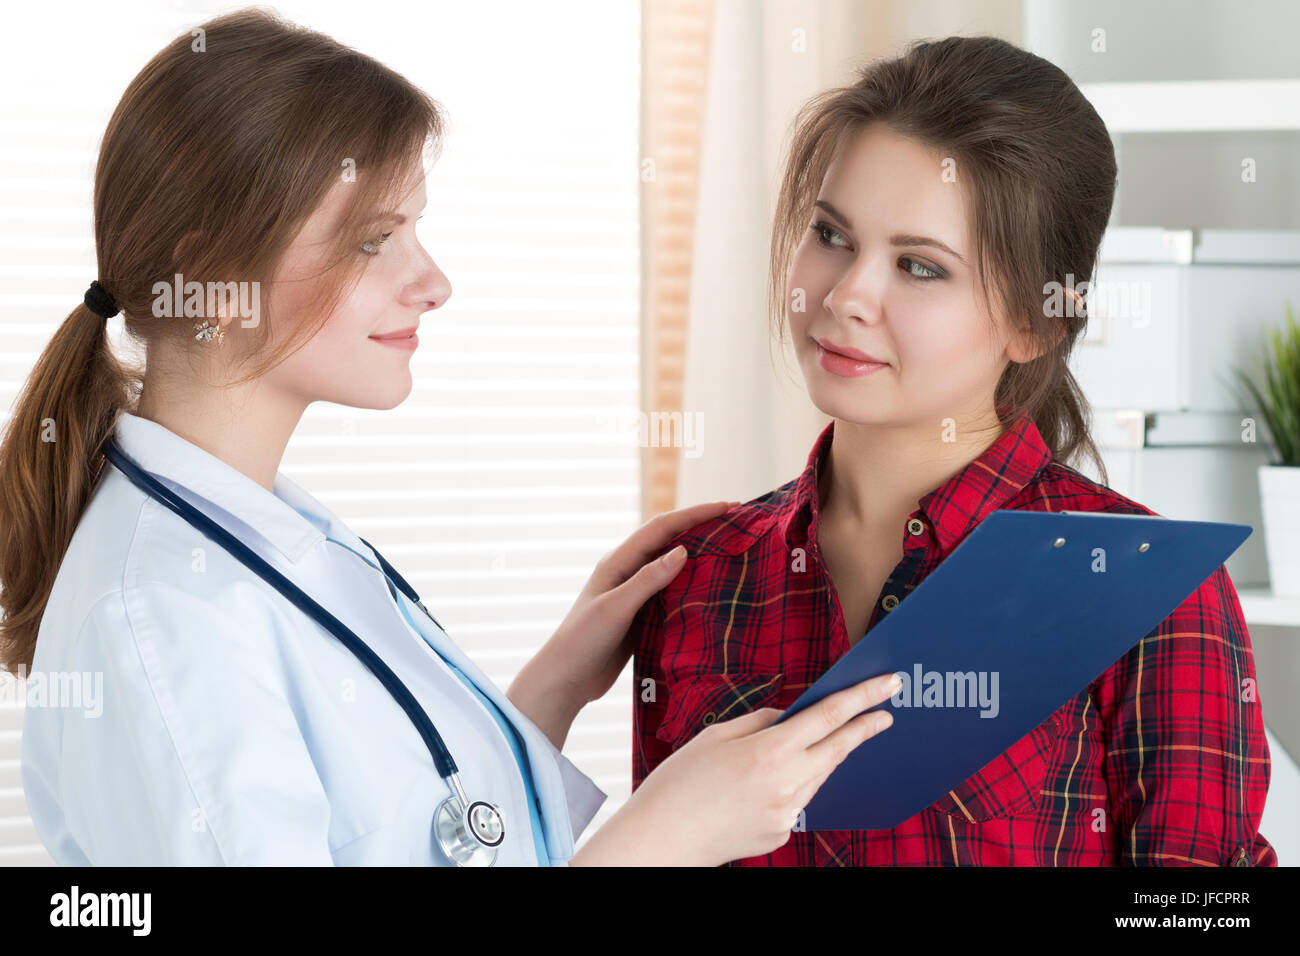 Friendly female doctor touching patient shoulder for encouragement, empathy, cheering and support after medical examination. Trust and ethics concept. Stock Photo